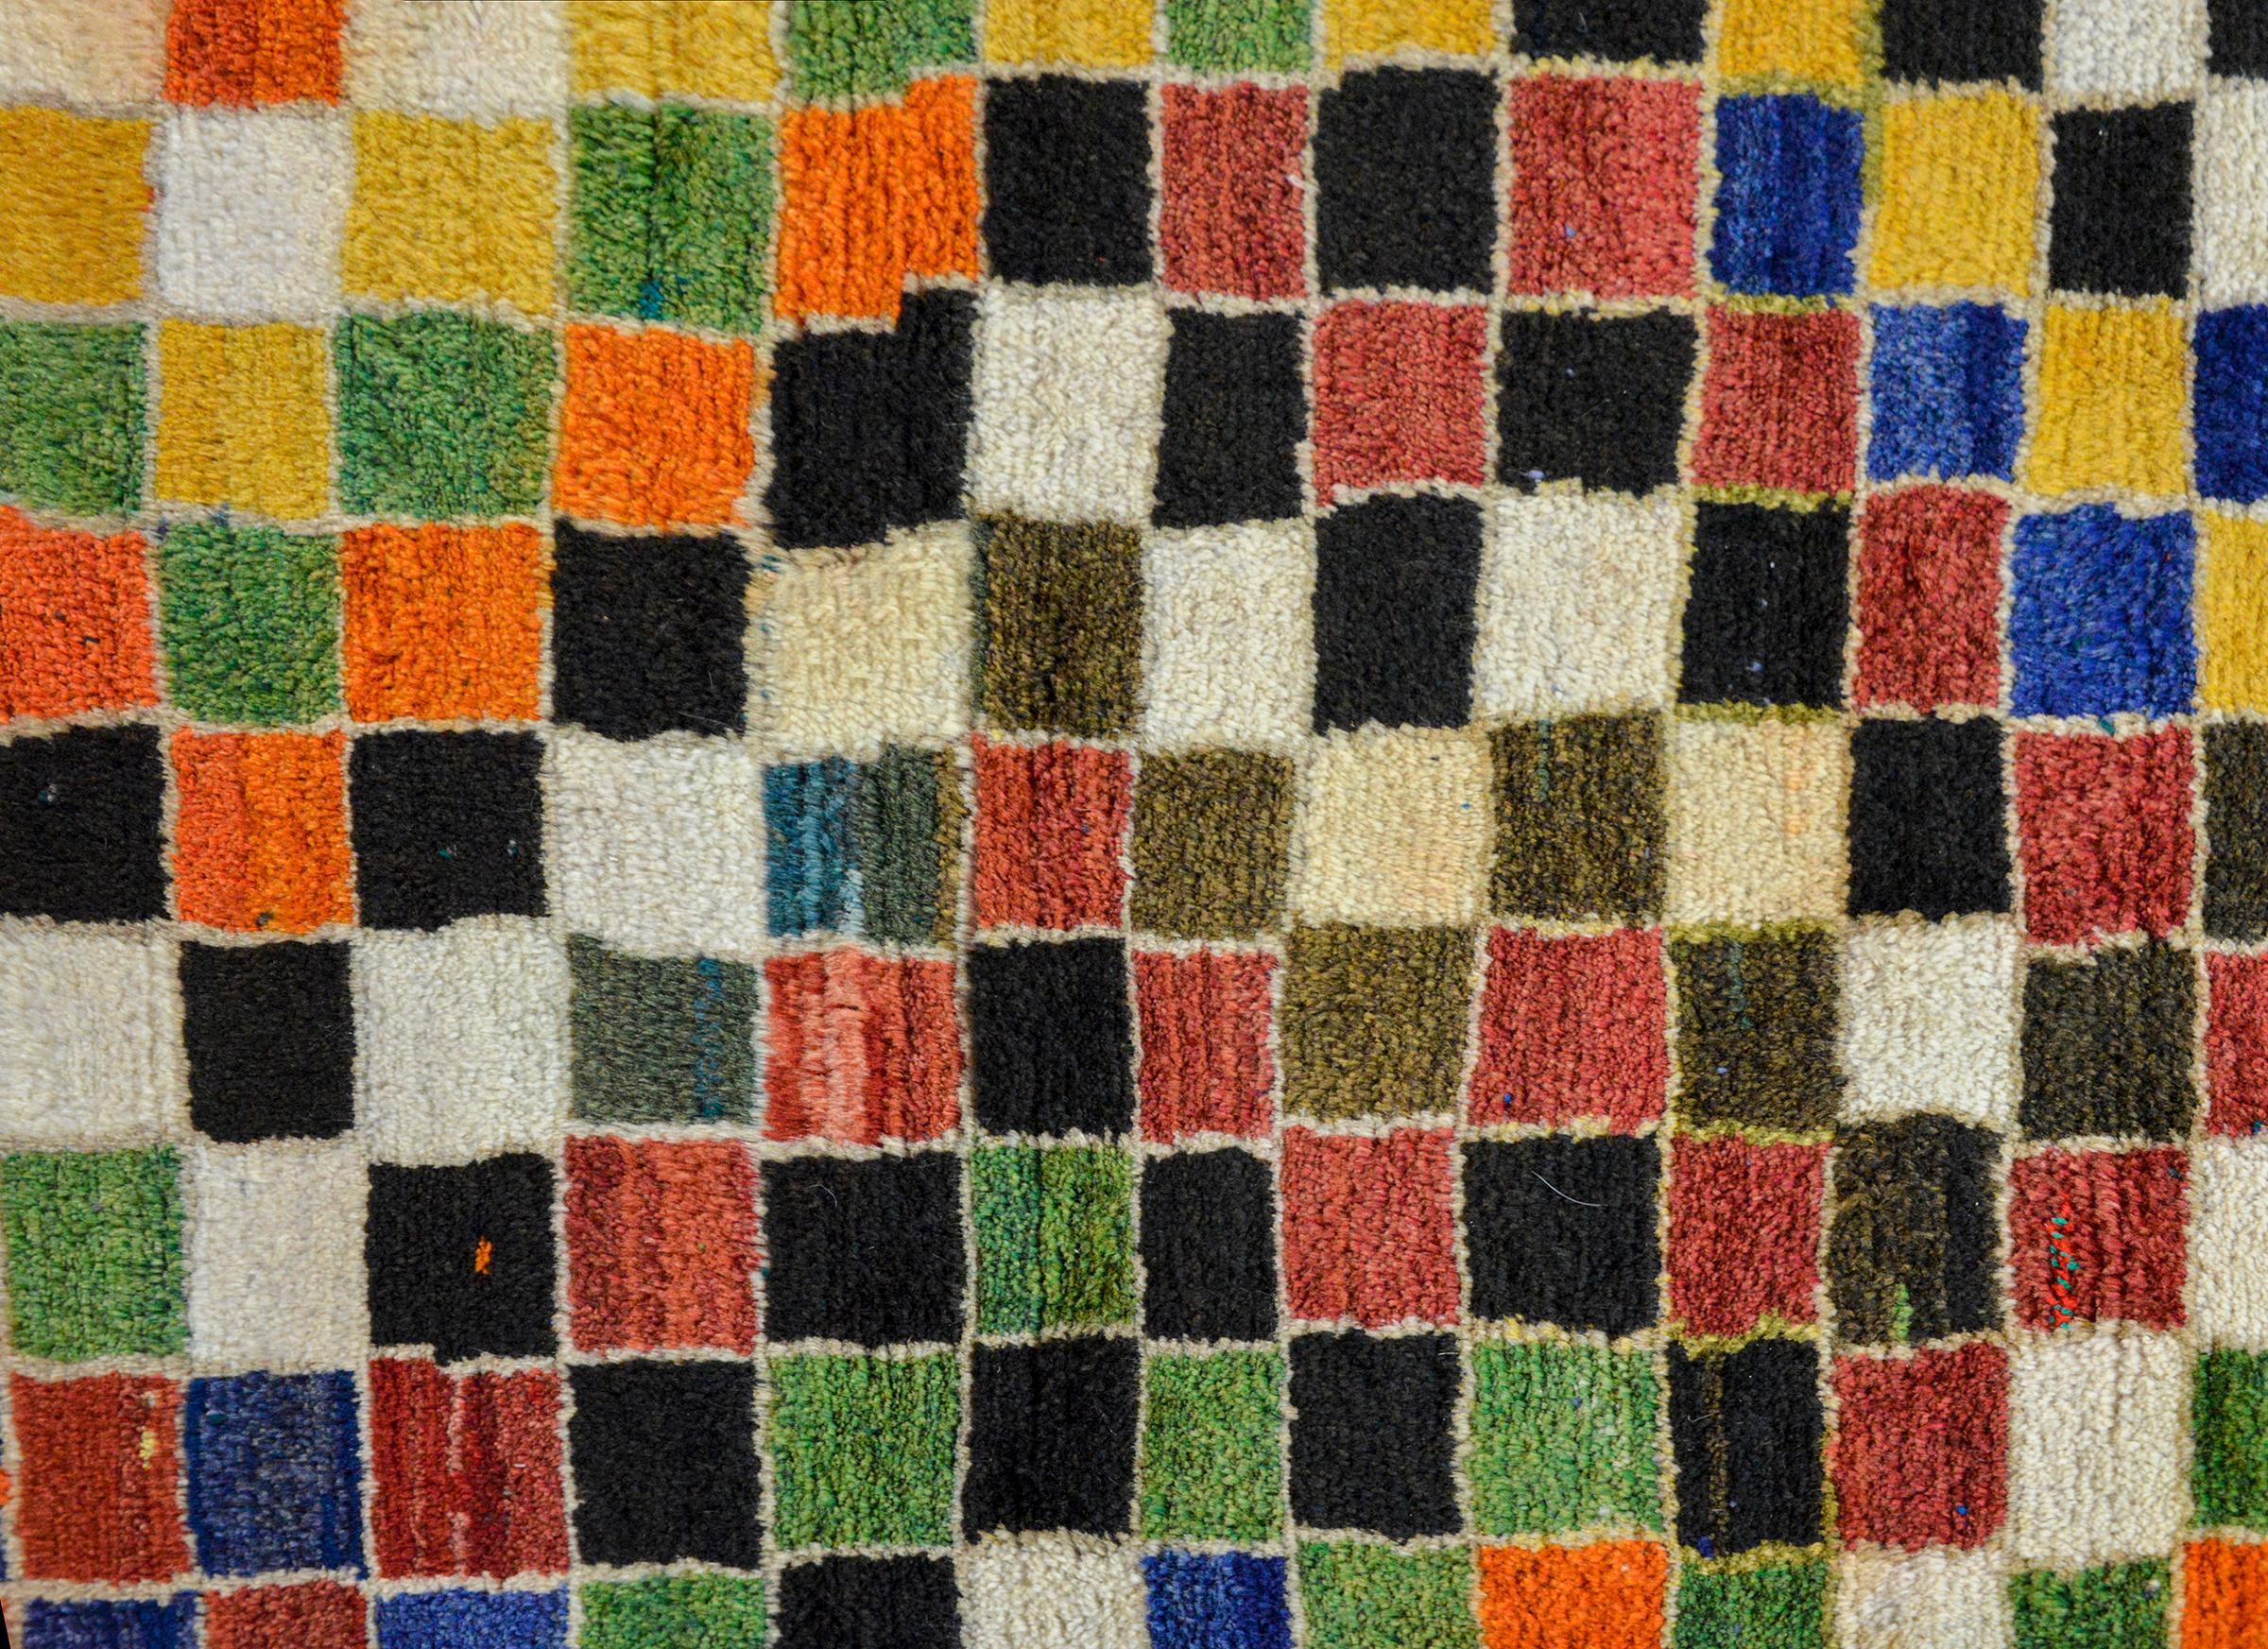 An incredible vintage Persian hand-knotted Gabbeh rug with a multi-colored checkerboard pattern woven in myriad colors including orange, gold, green, black, white, and indigo, and surrounded by a thin zigzag patterned border.